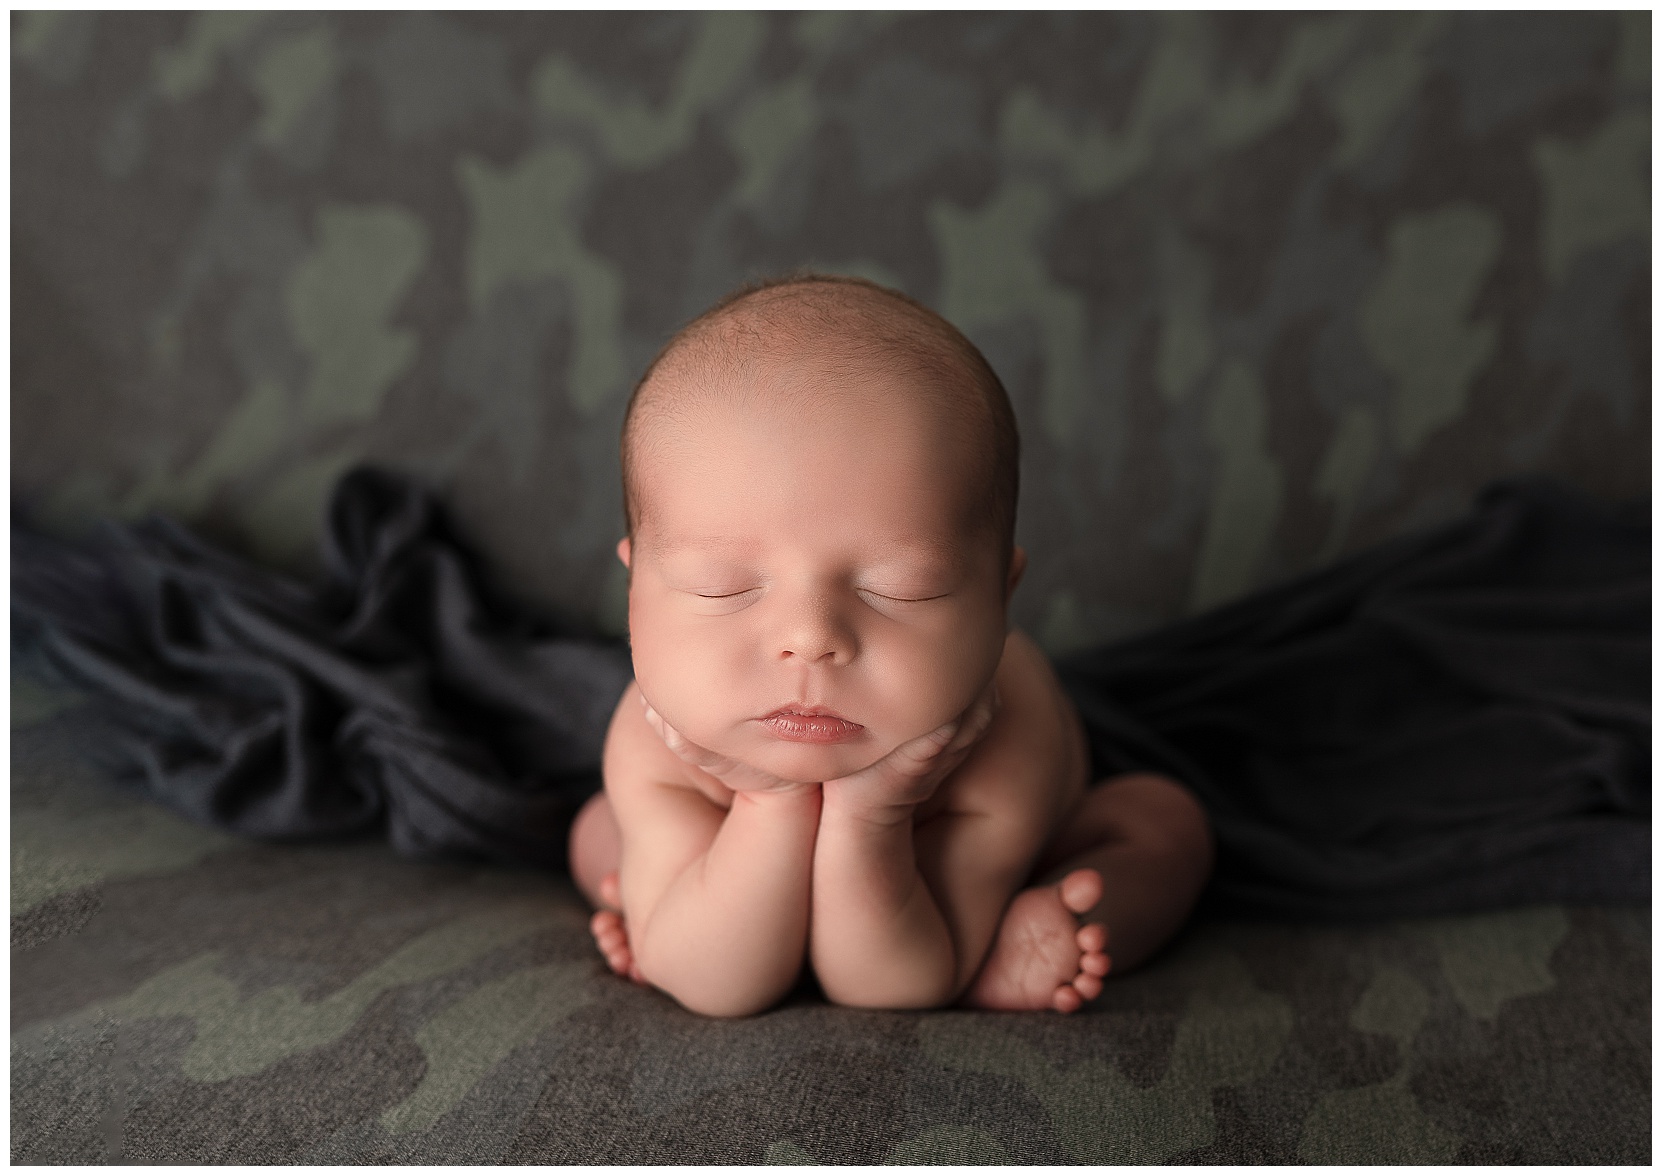 baby sleeping in the froggy pose on a green camo blanket